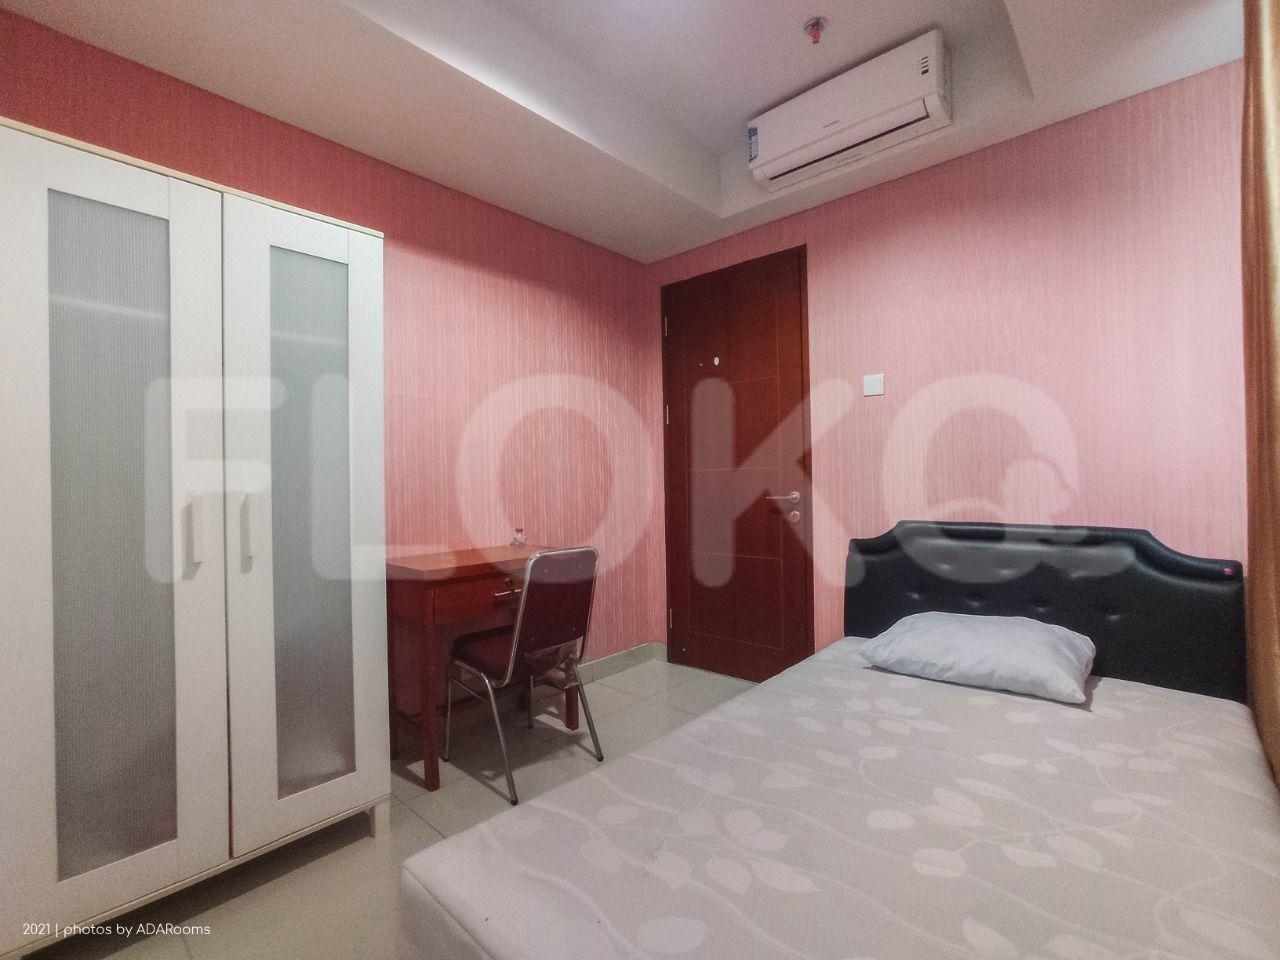 2 Bedroom on 12th Floor fpa2a4 for Rent in Springhill Terrace Residence